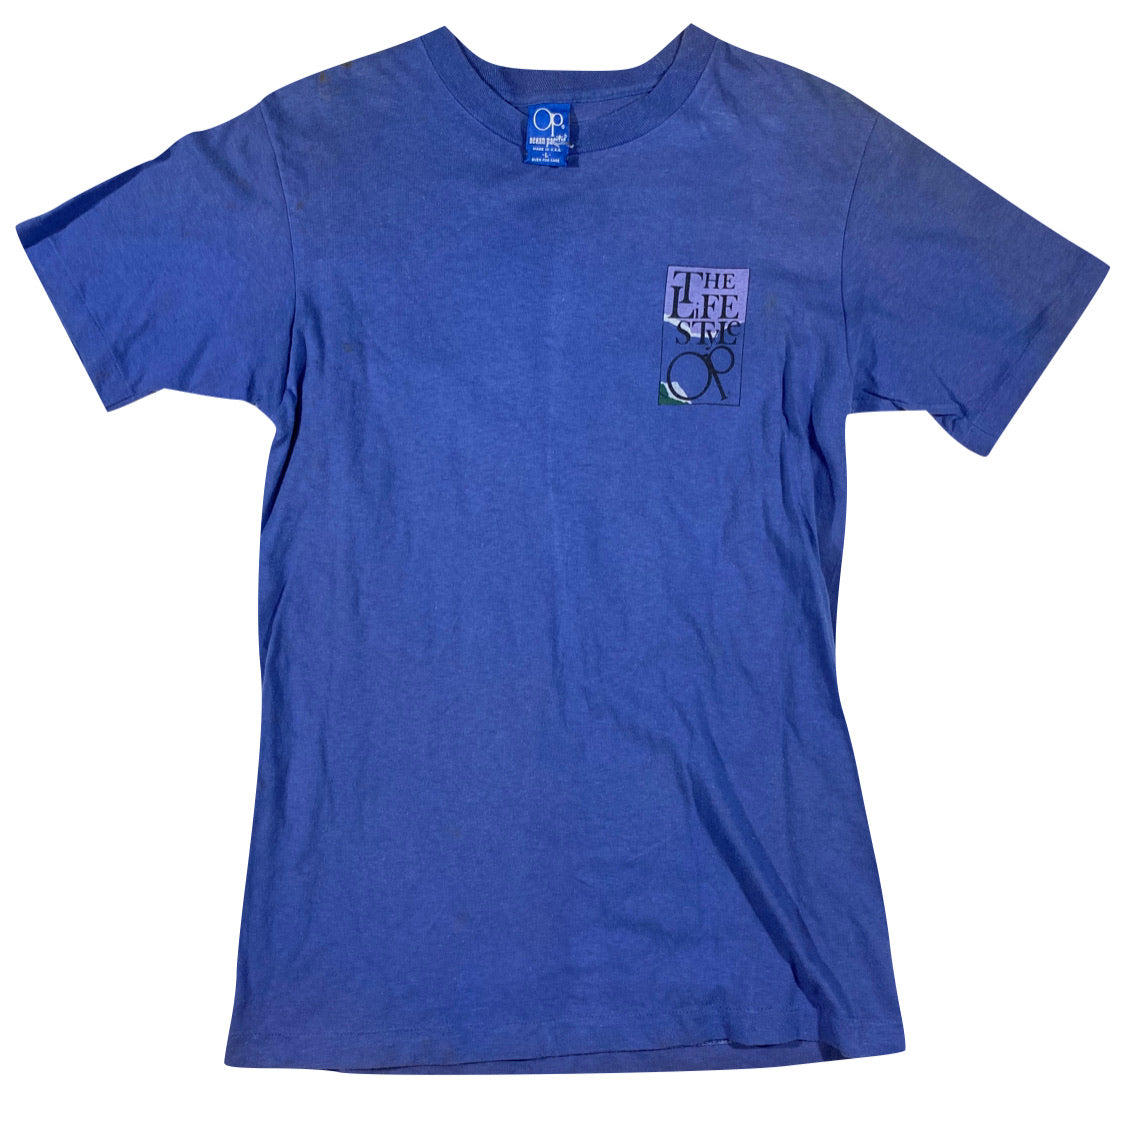 90s OP The life style tee M/L